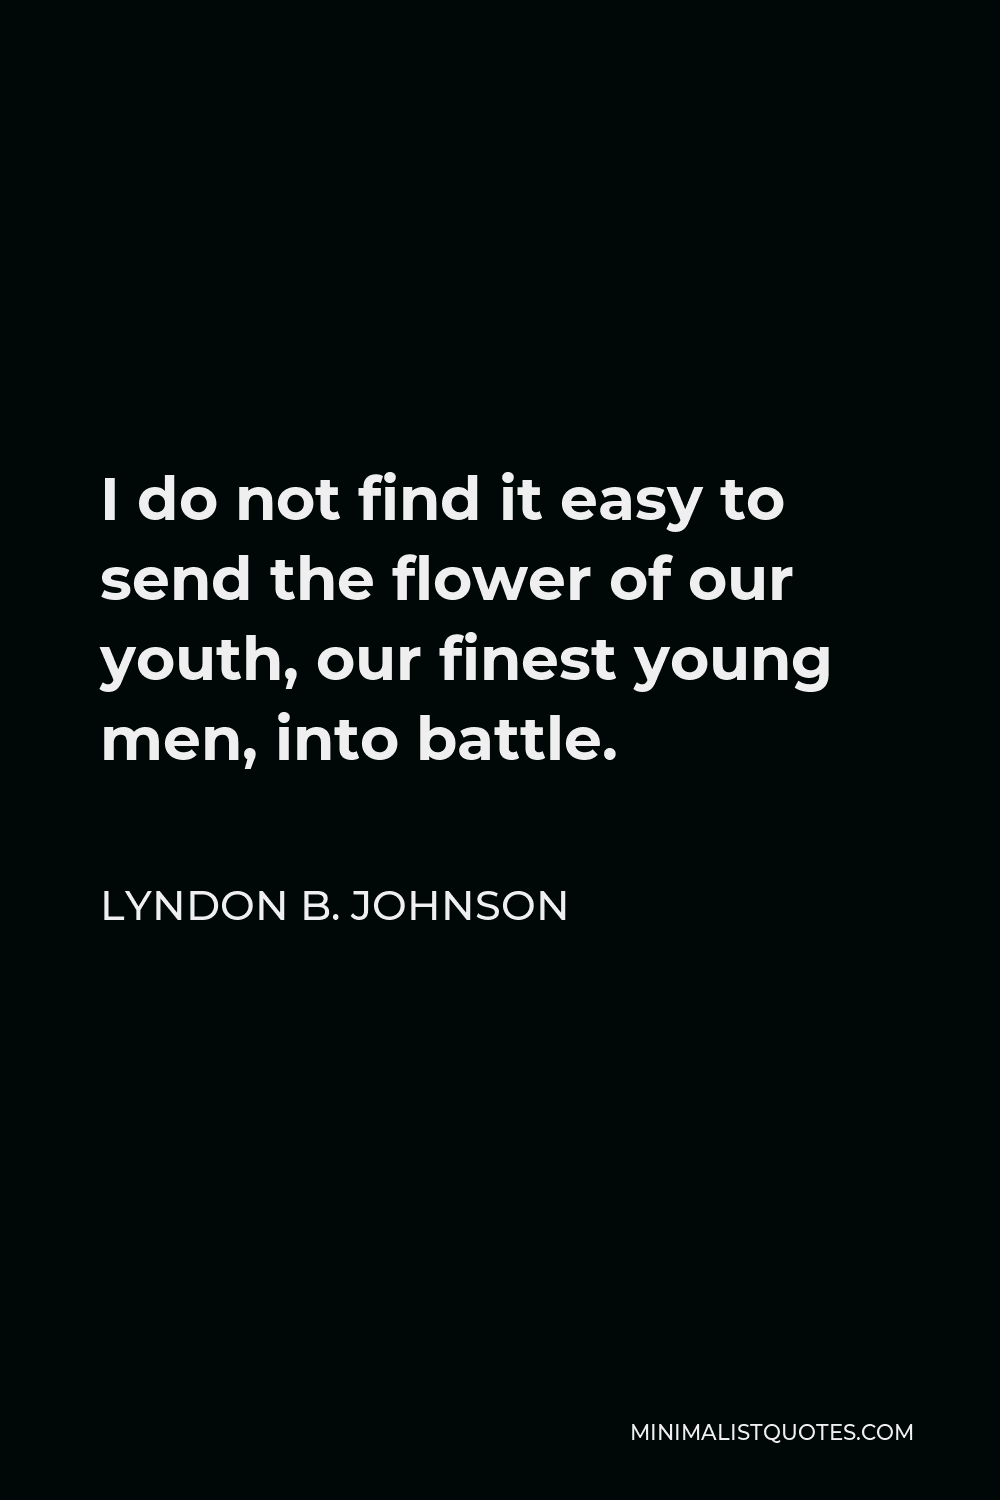 Lyndon B. Johnson Quote - I do not find it easy to send the flower of our youth, our finest young men, into battle.